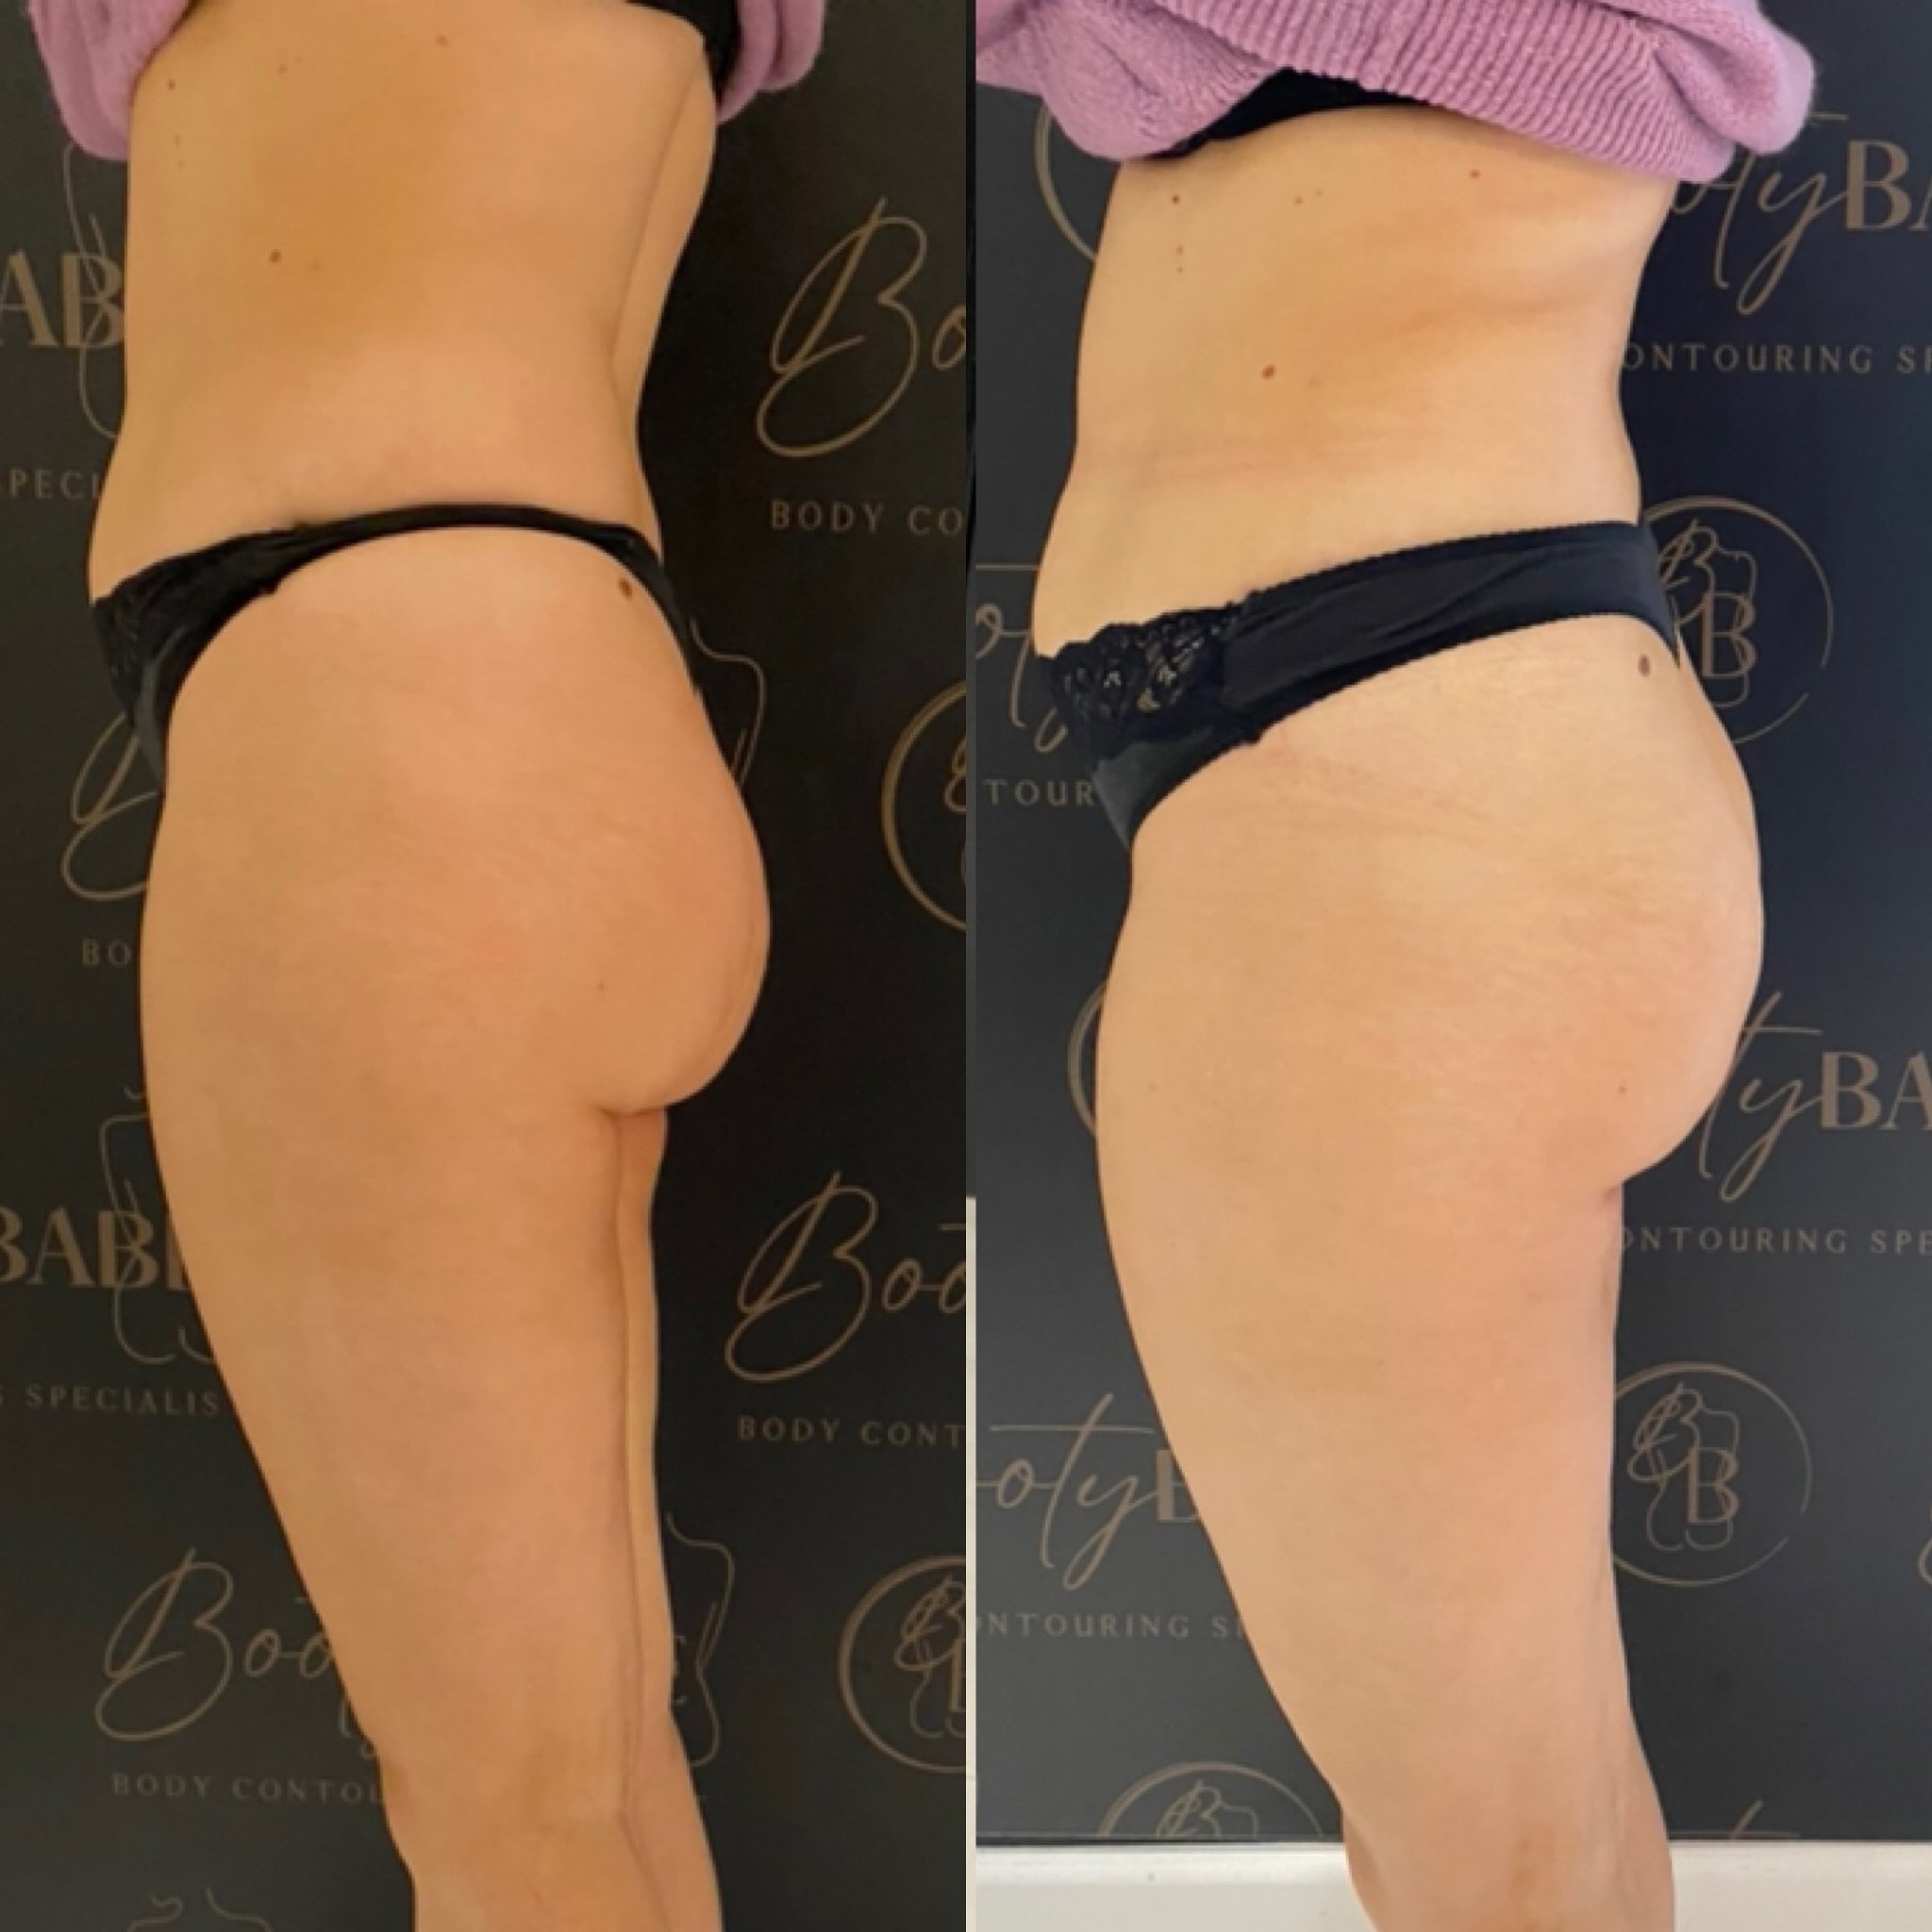 First session bbl results! Fuller, rounder and lifted bum in 1 hour! A course of 5 is recommended for best results and long lasting results ❤️ DM us to book your bbl for summer! 

✅ DM to book your appointments
✅ DM about our machine &amp; training 
